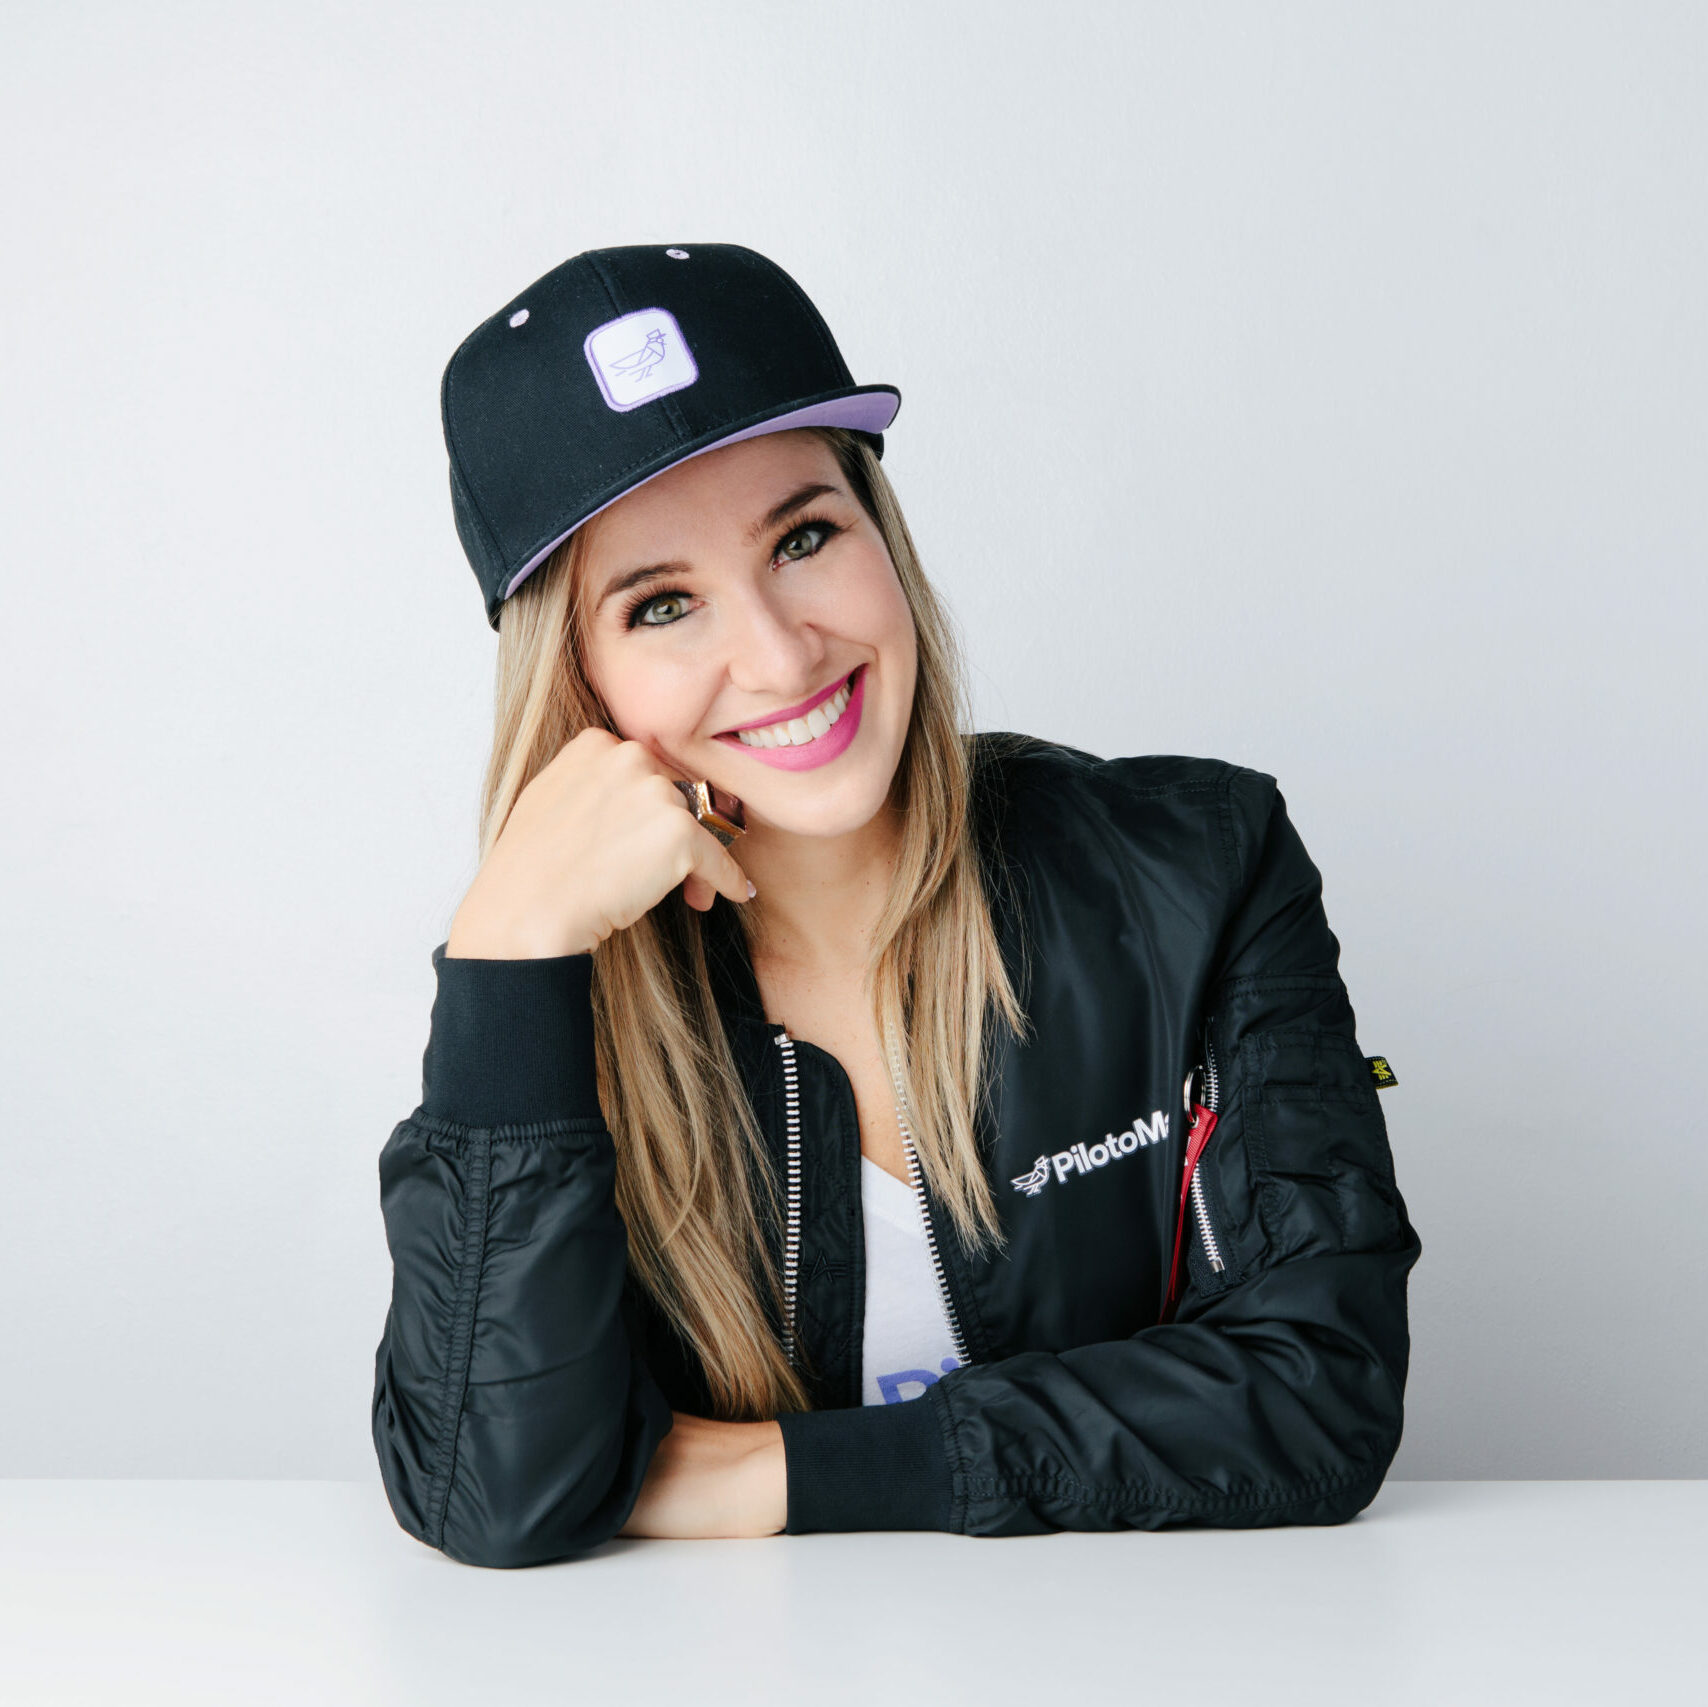 PilotoMail CEO and Cofounder Sofia Stolberg